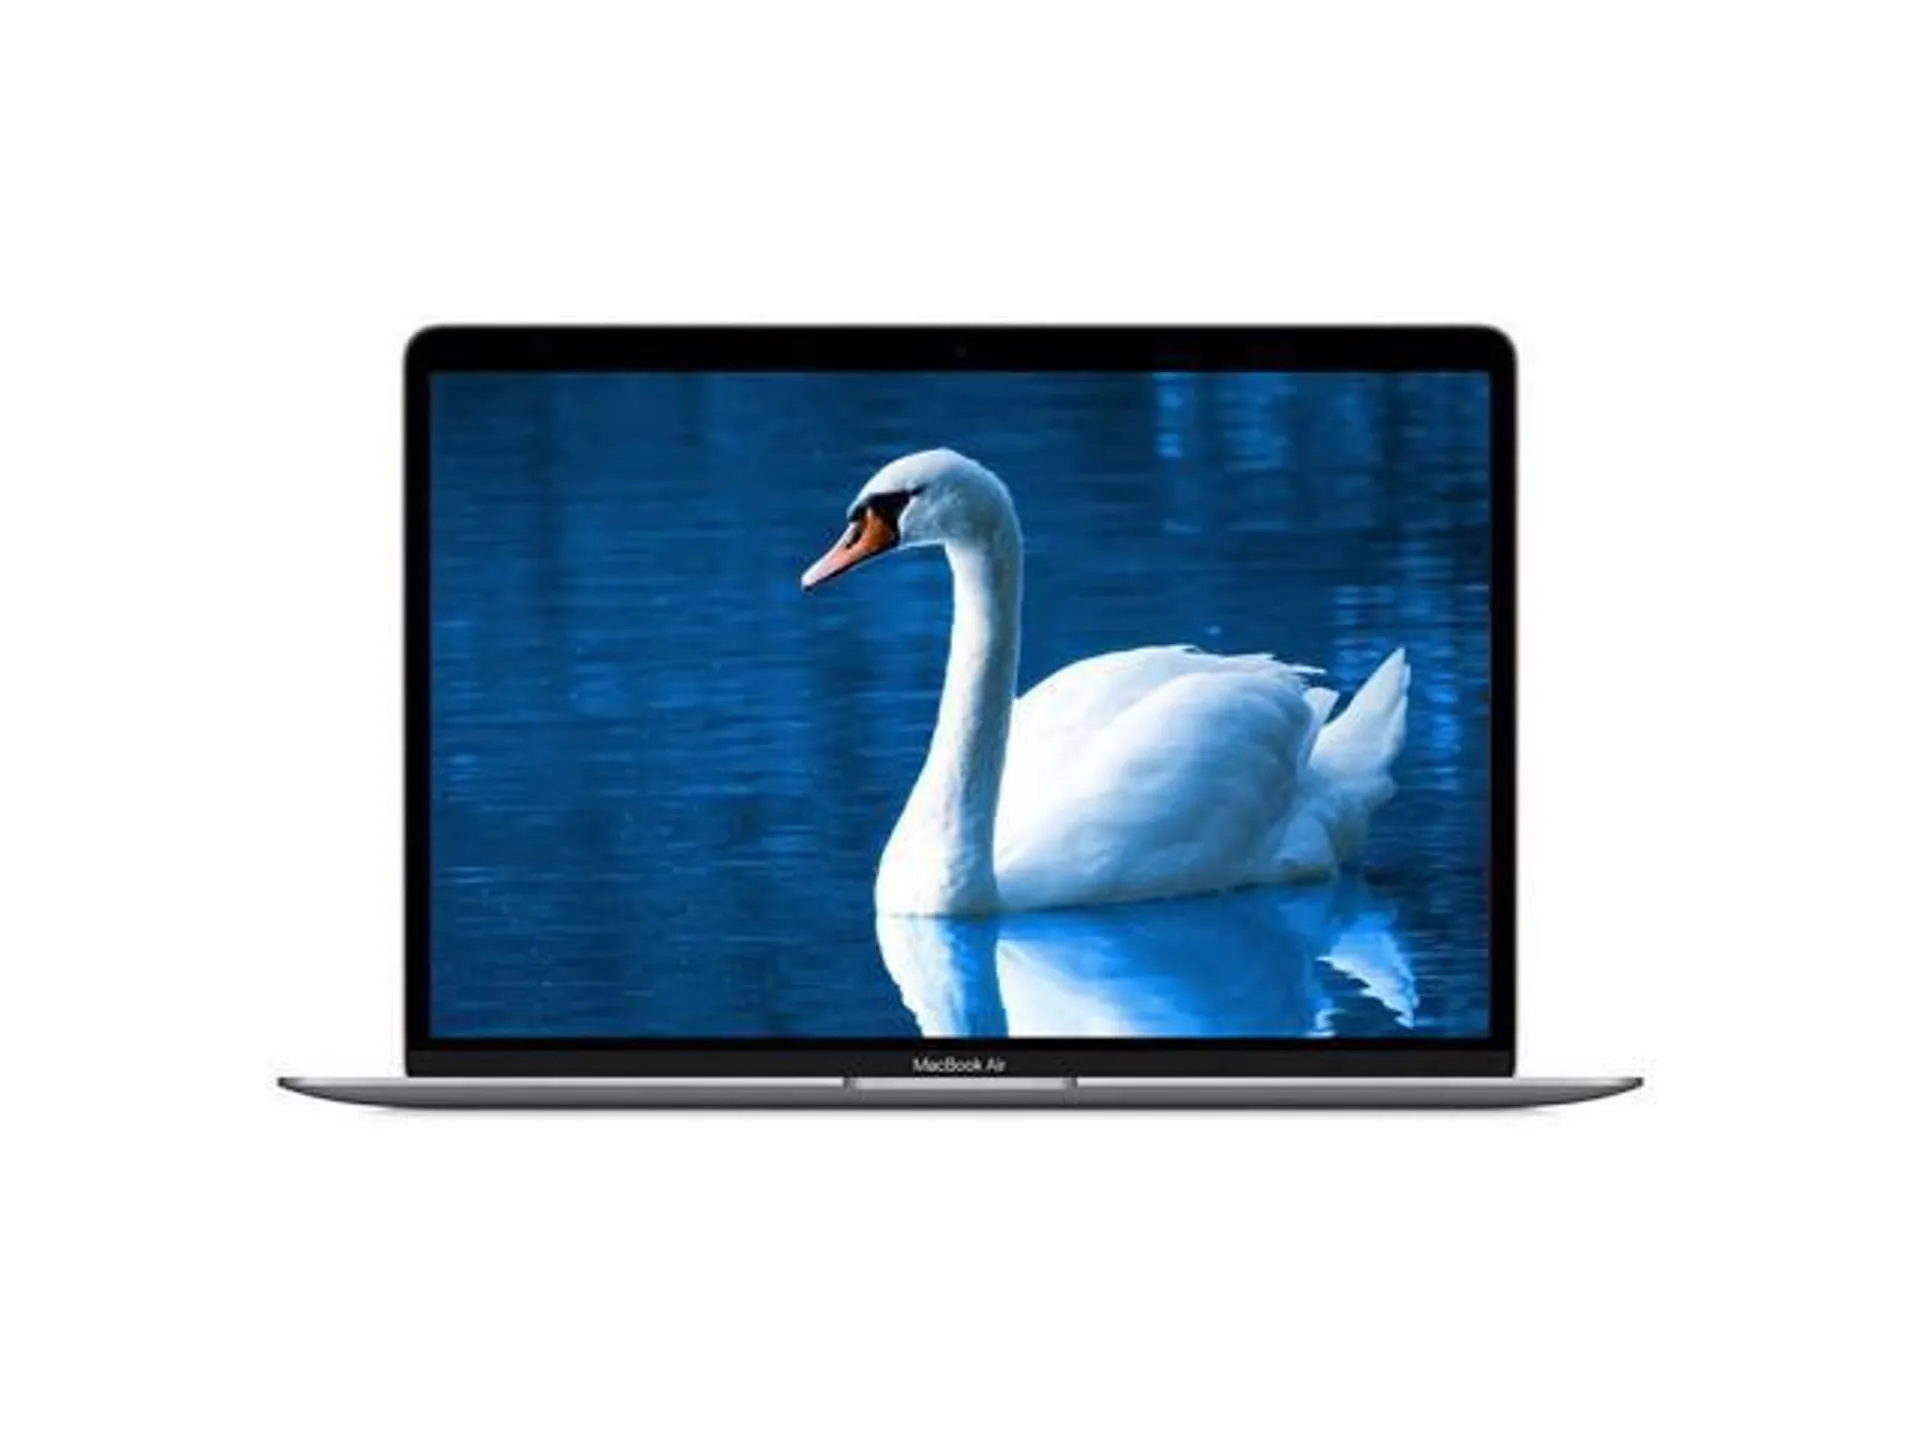 Apple A Grade Macbook Air 13.3-inch (Retina, Space Gray) 1.1Ghz Dual Core i3 (2020) MWTJ2LL/A 512GB SSD 8GB Memory 2560x1600 Display Mac OS Power Adapter Included